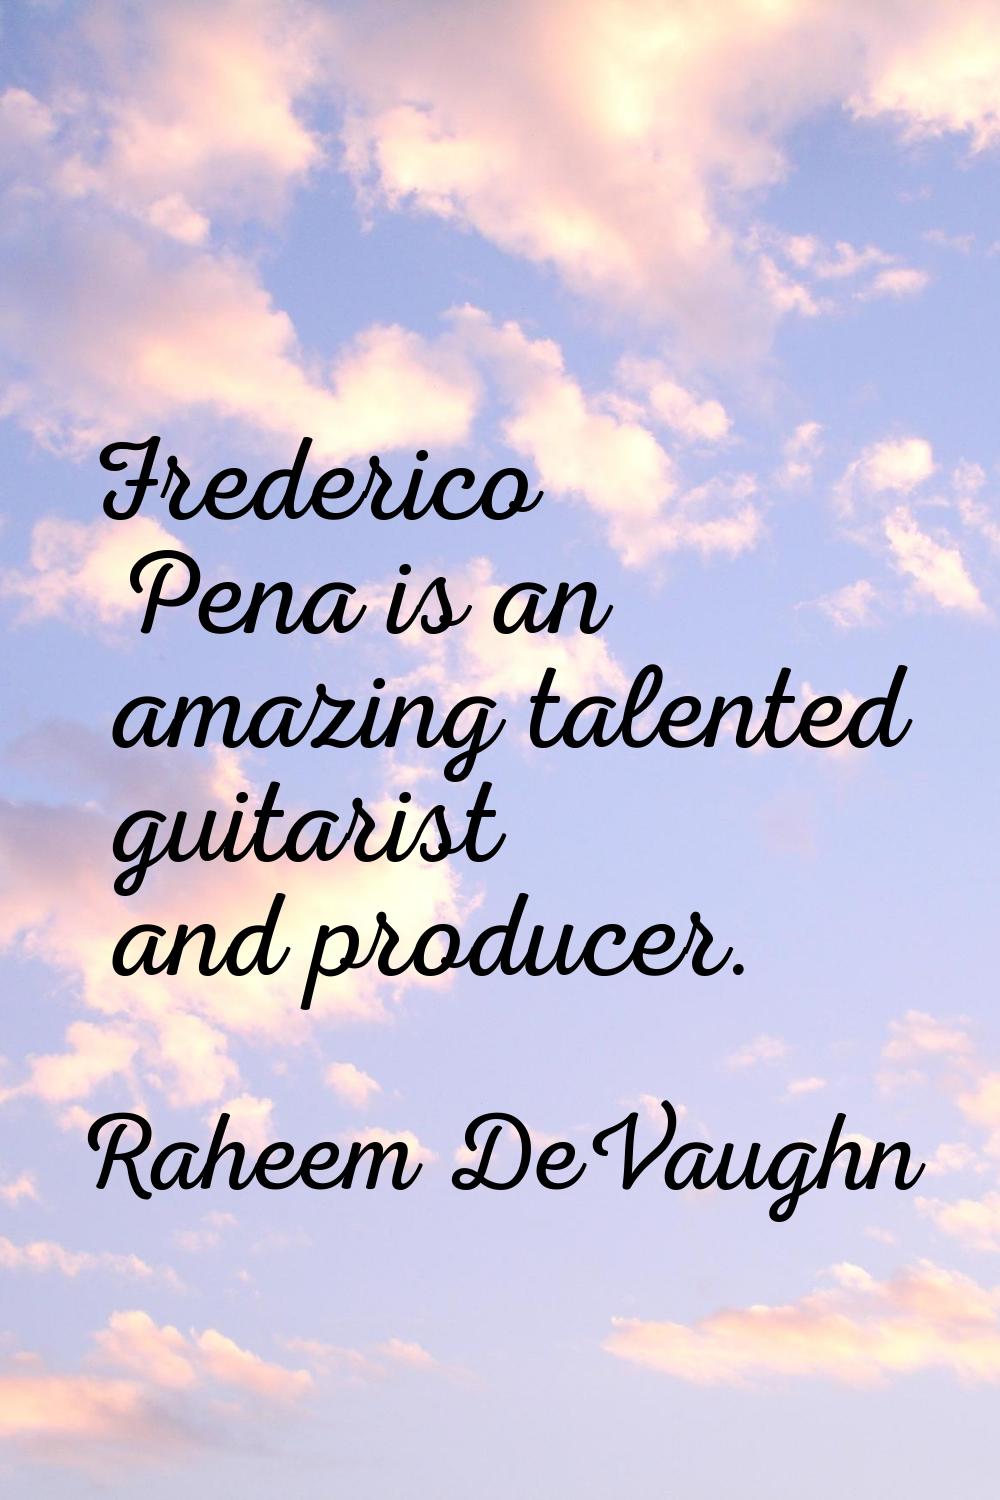 Frederico Pena is an amazing talented guitarist and producer.